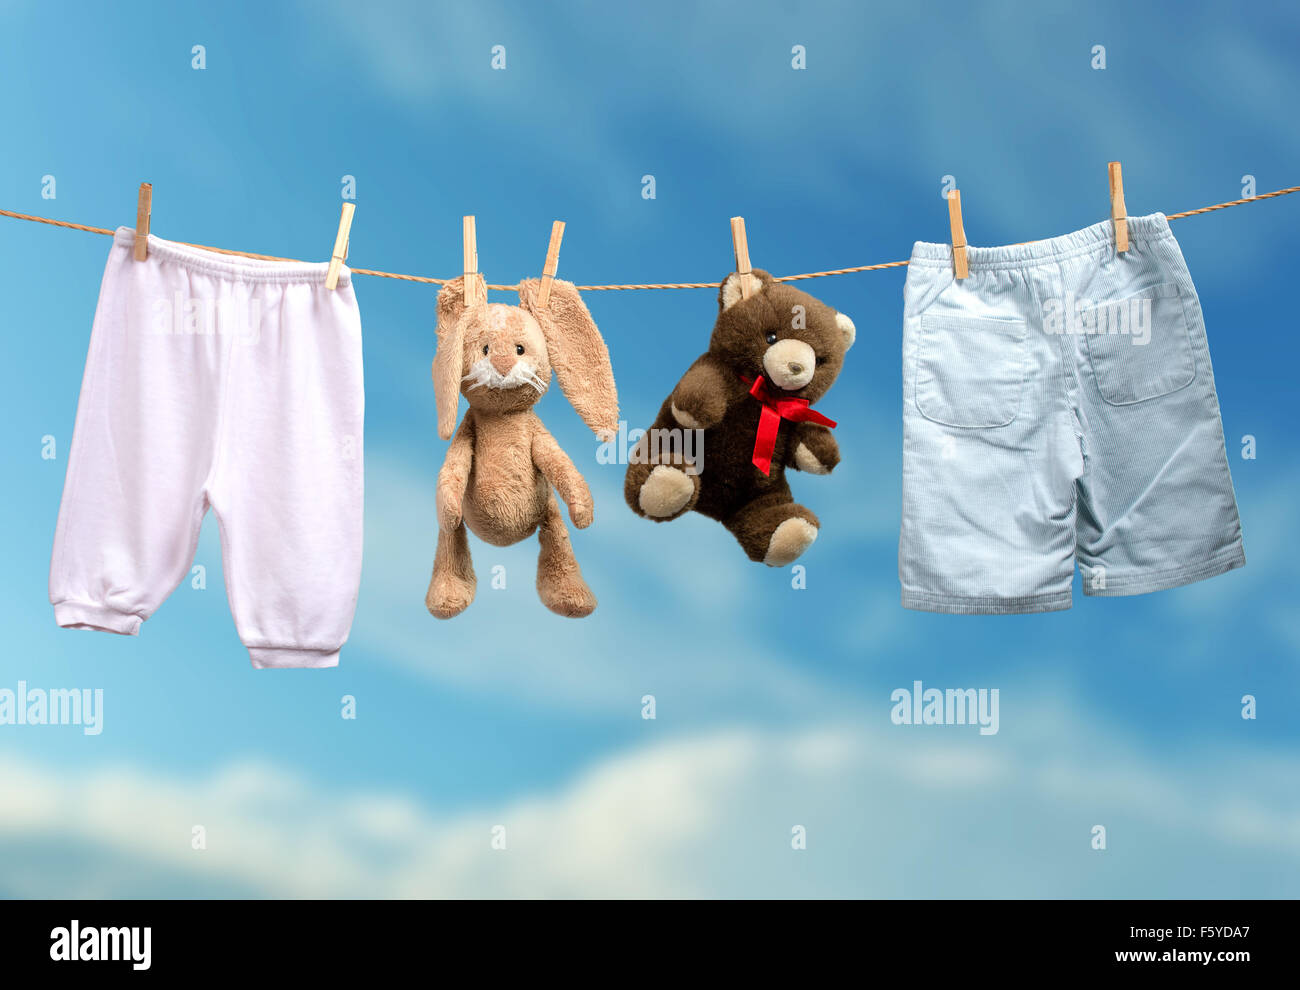 Boy or girl? on the outdoor clothesline Stock Photo